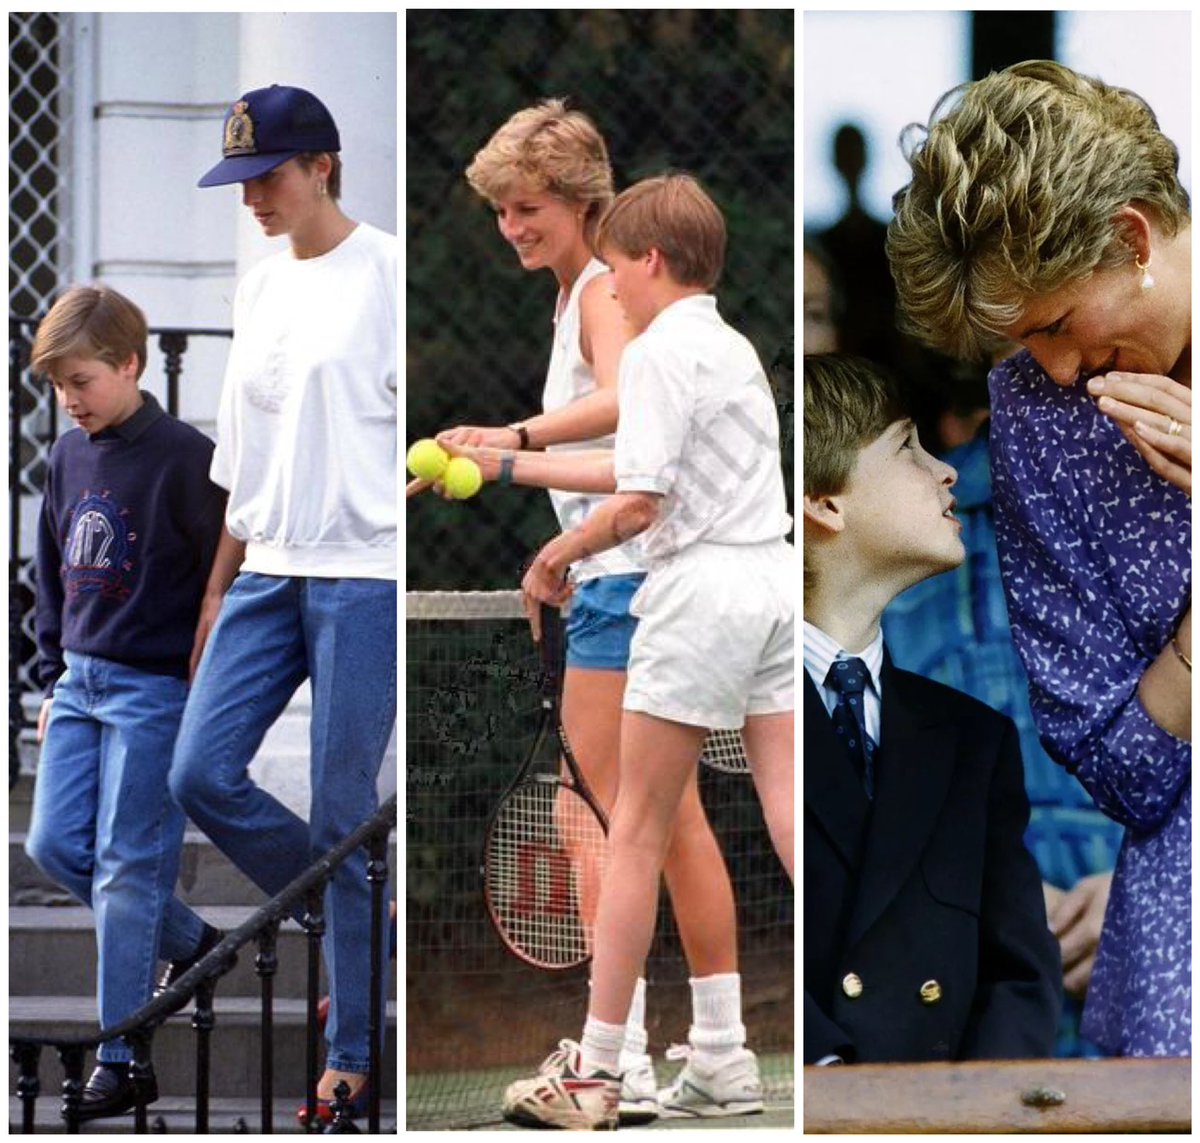 Princess Diana called Prince William her ‘soulmate’ because they have very similar personalities, would talk for hours and were two peas in a pod. Yes both Prince’s have part of her compassion but William’s connection with his mother runs deeper on an emotional level. #Wombat ❤️